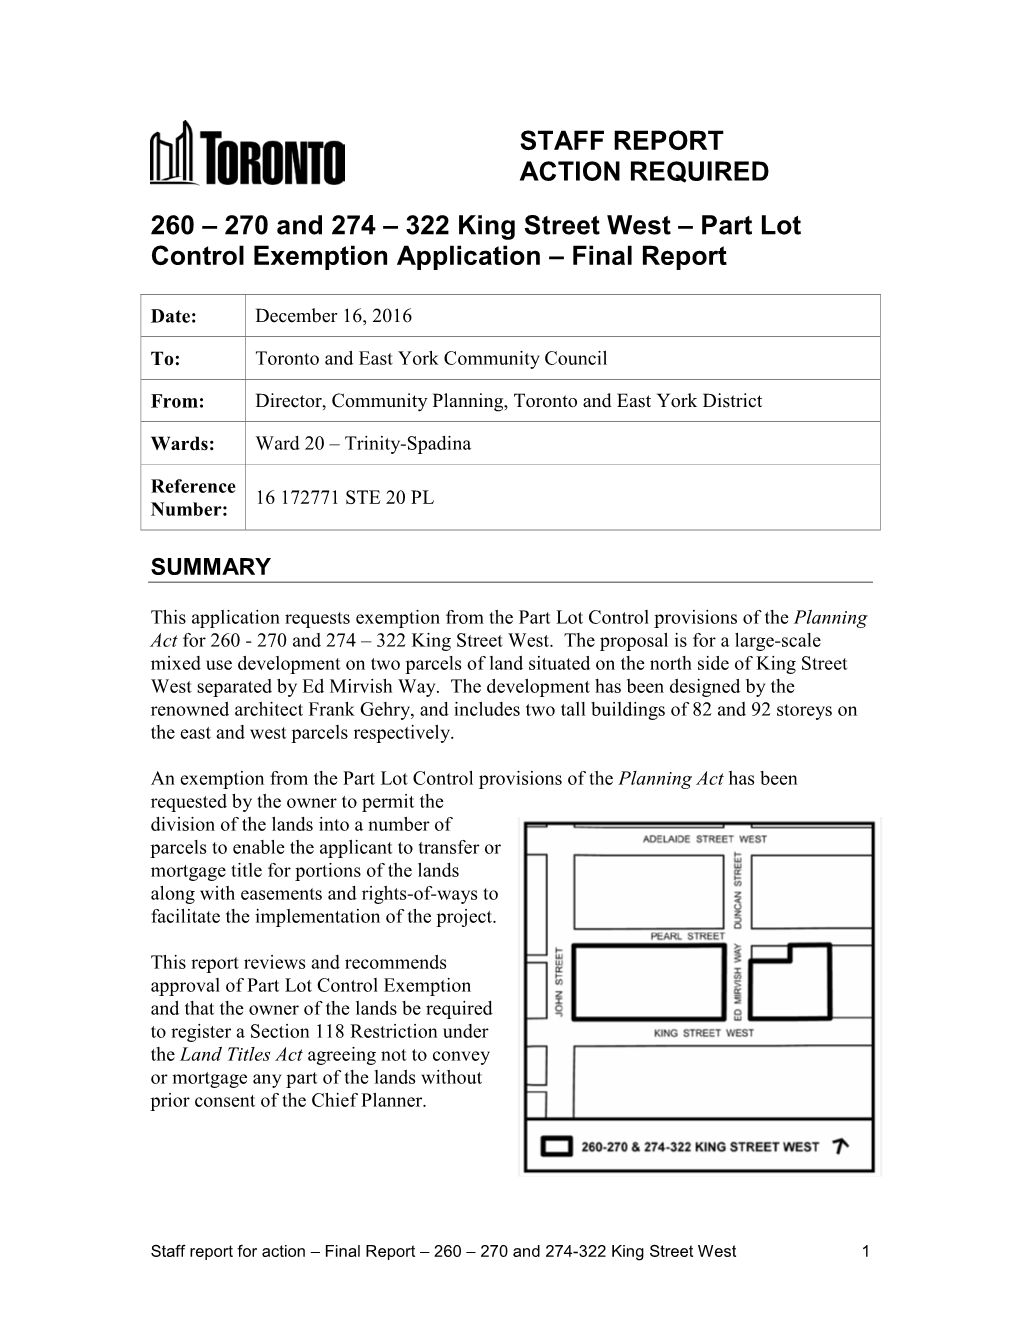 260 – 270 and 274-322 King Street West 1 RECOMMENDATIONS